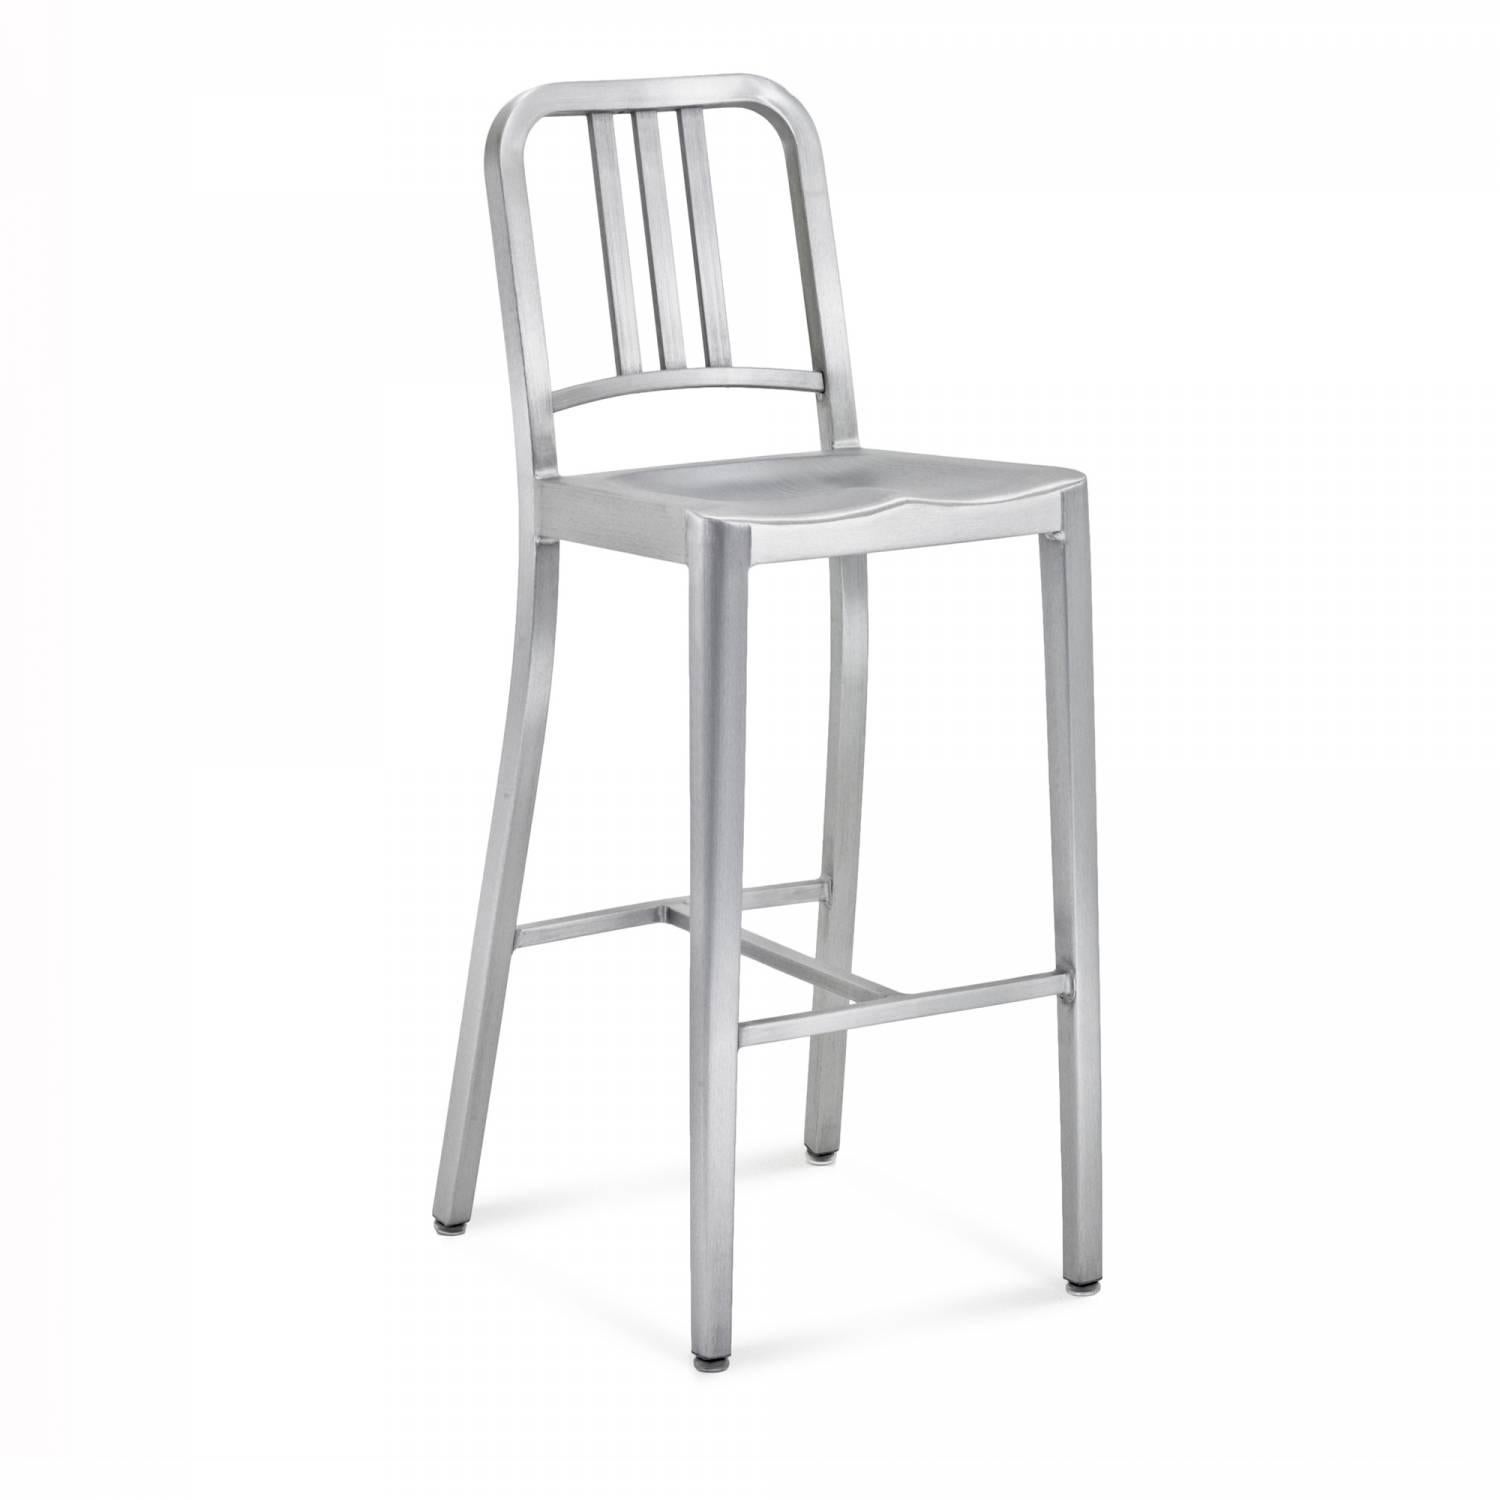 First built for use on submarines in 1944, the Navy chair has been in continuous production ever since. With the famous 77 step process, our craftsmen take soft, recycled aluminum, hand form and weld it- then temper it for strength. Finally, the